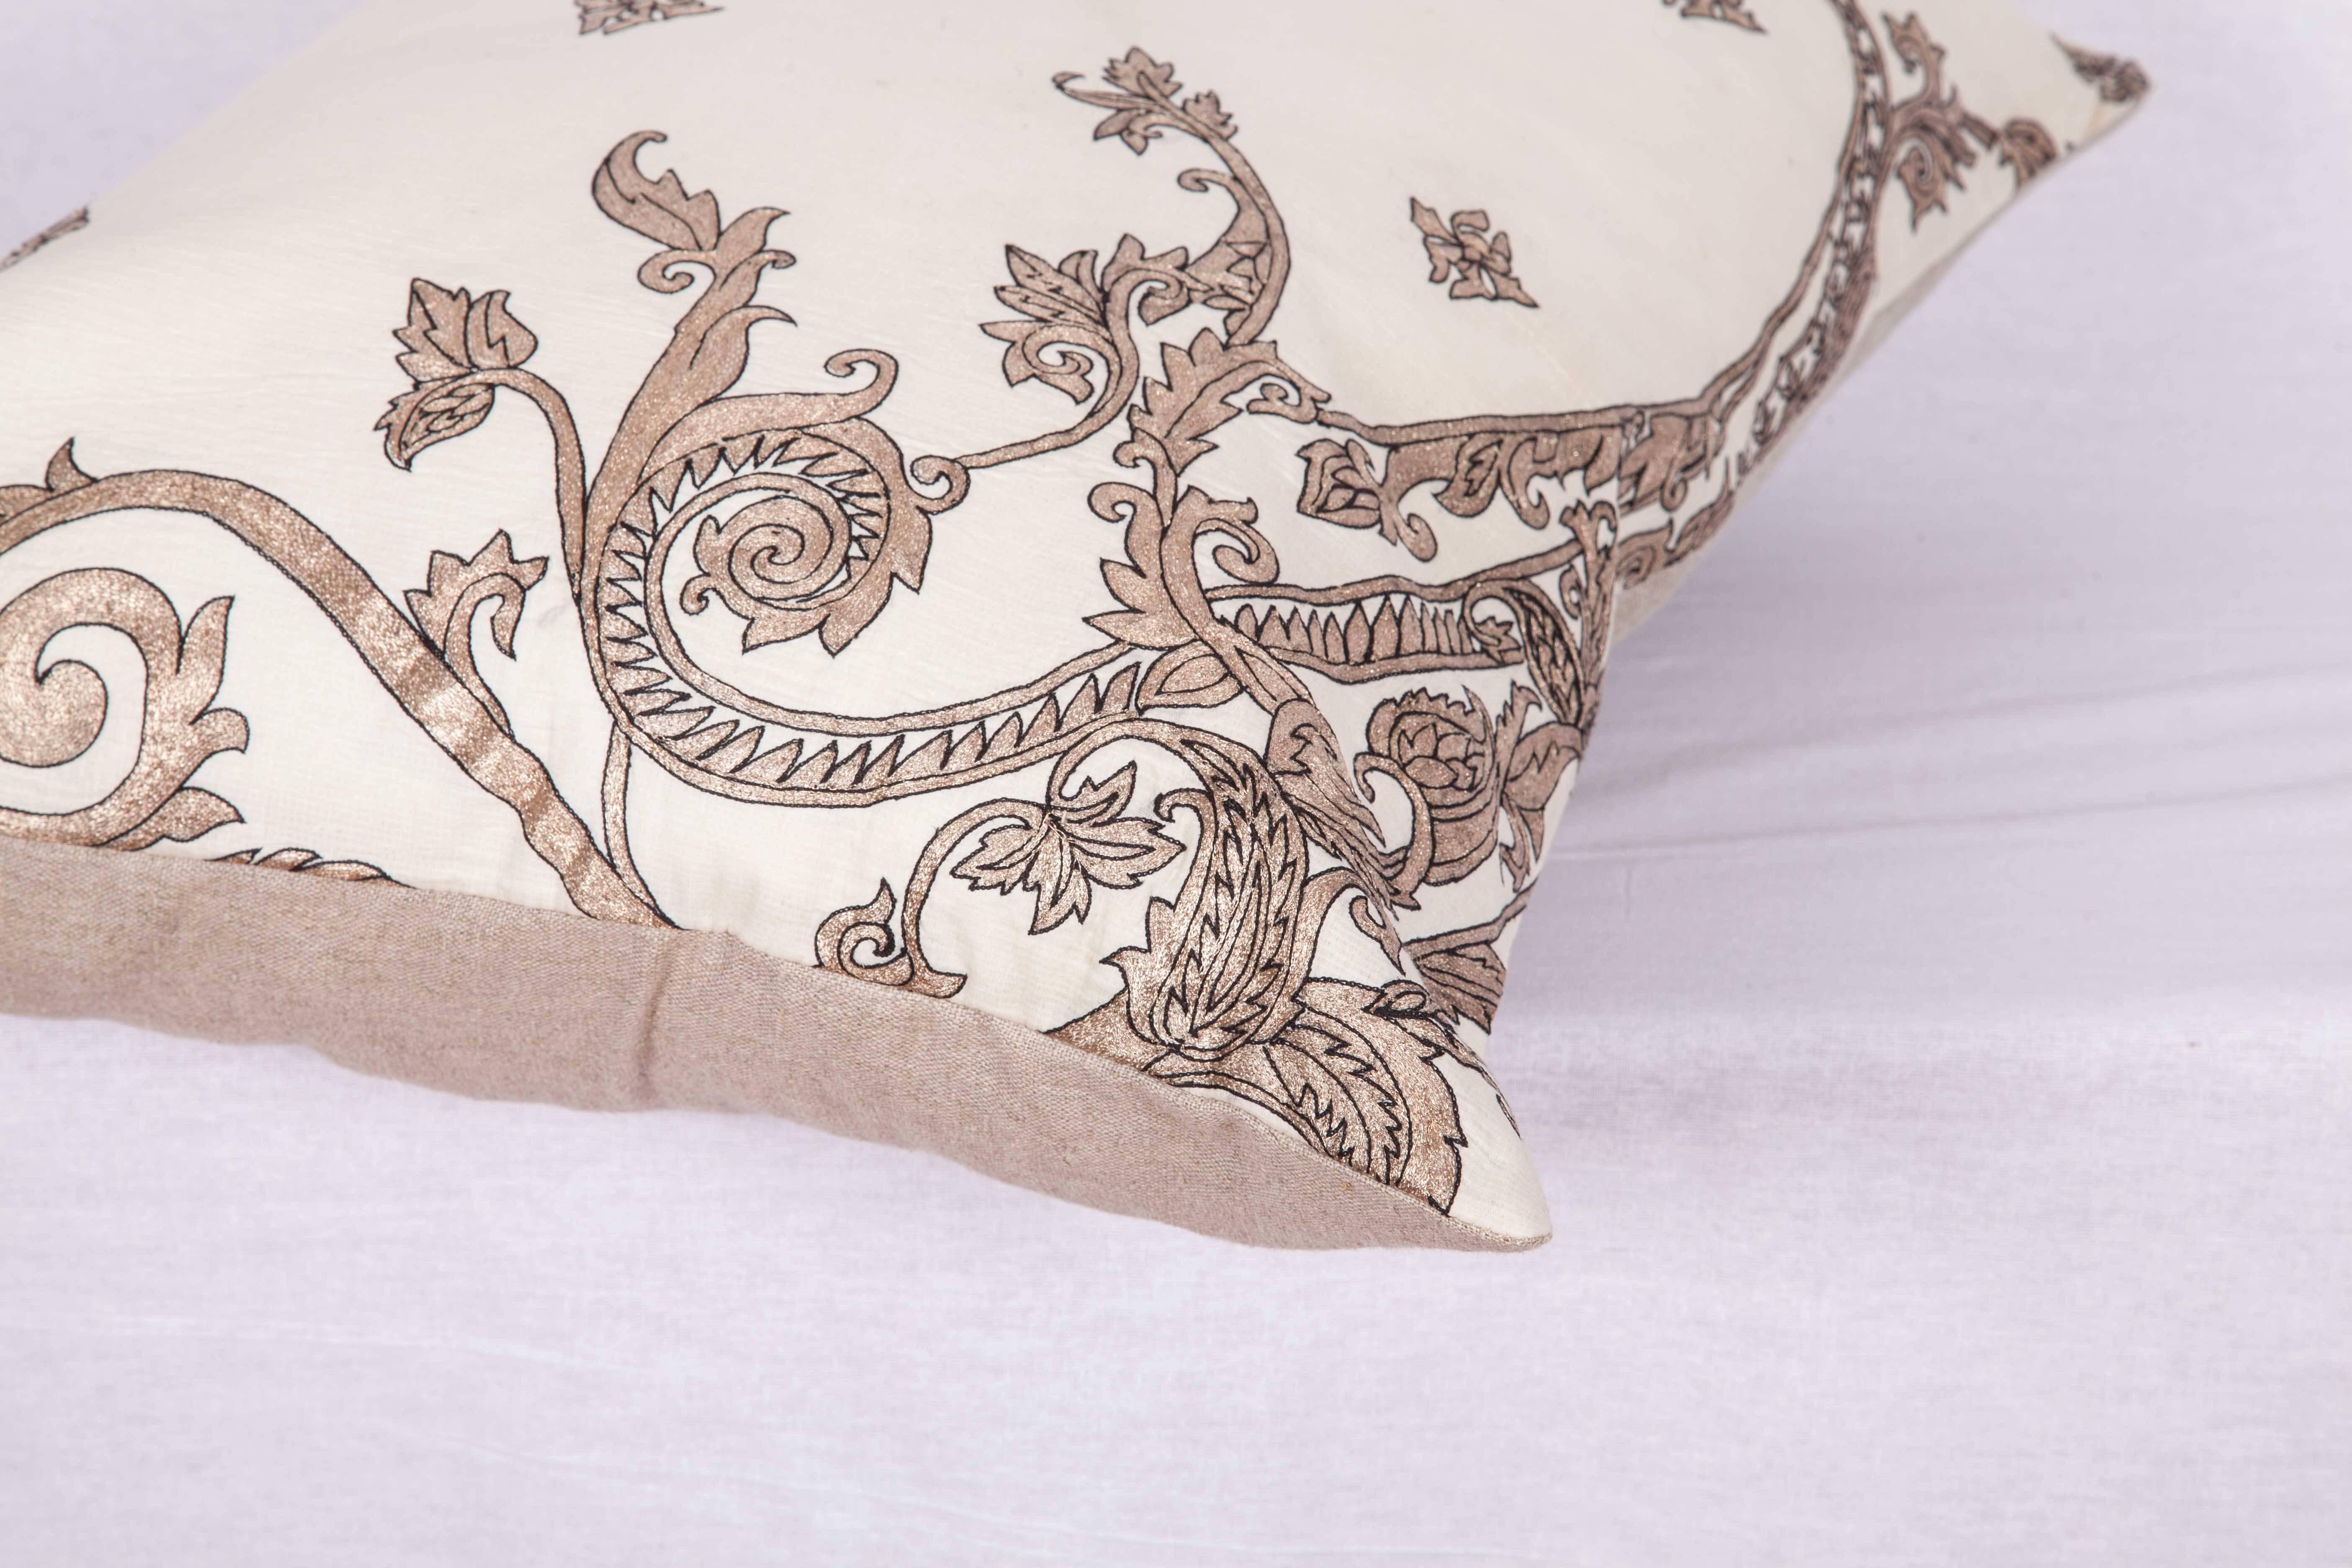 Embroidered Antique Pillow Made Out of a 19th Century or Earlier European Silver Embroidery